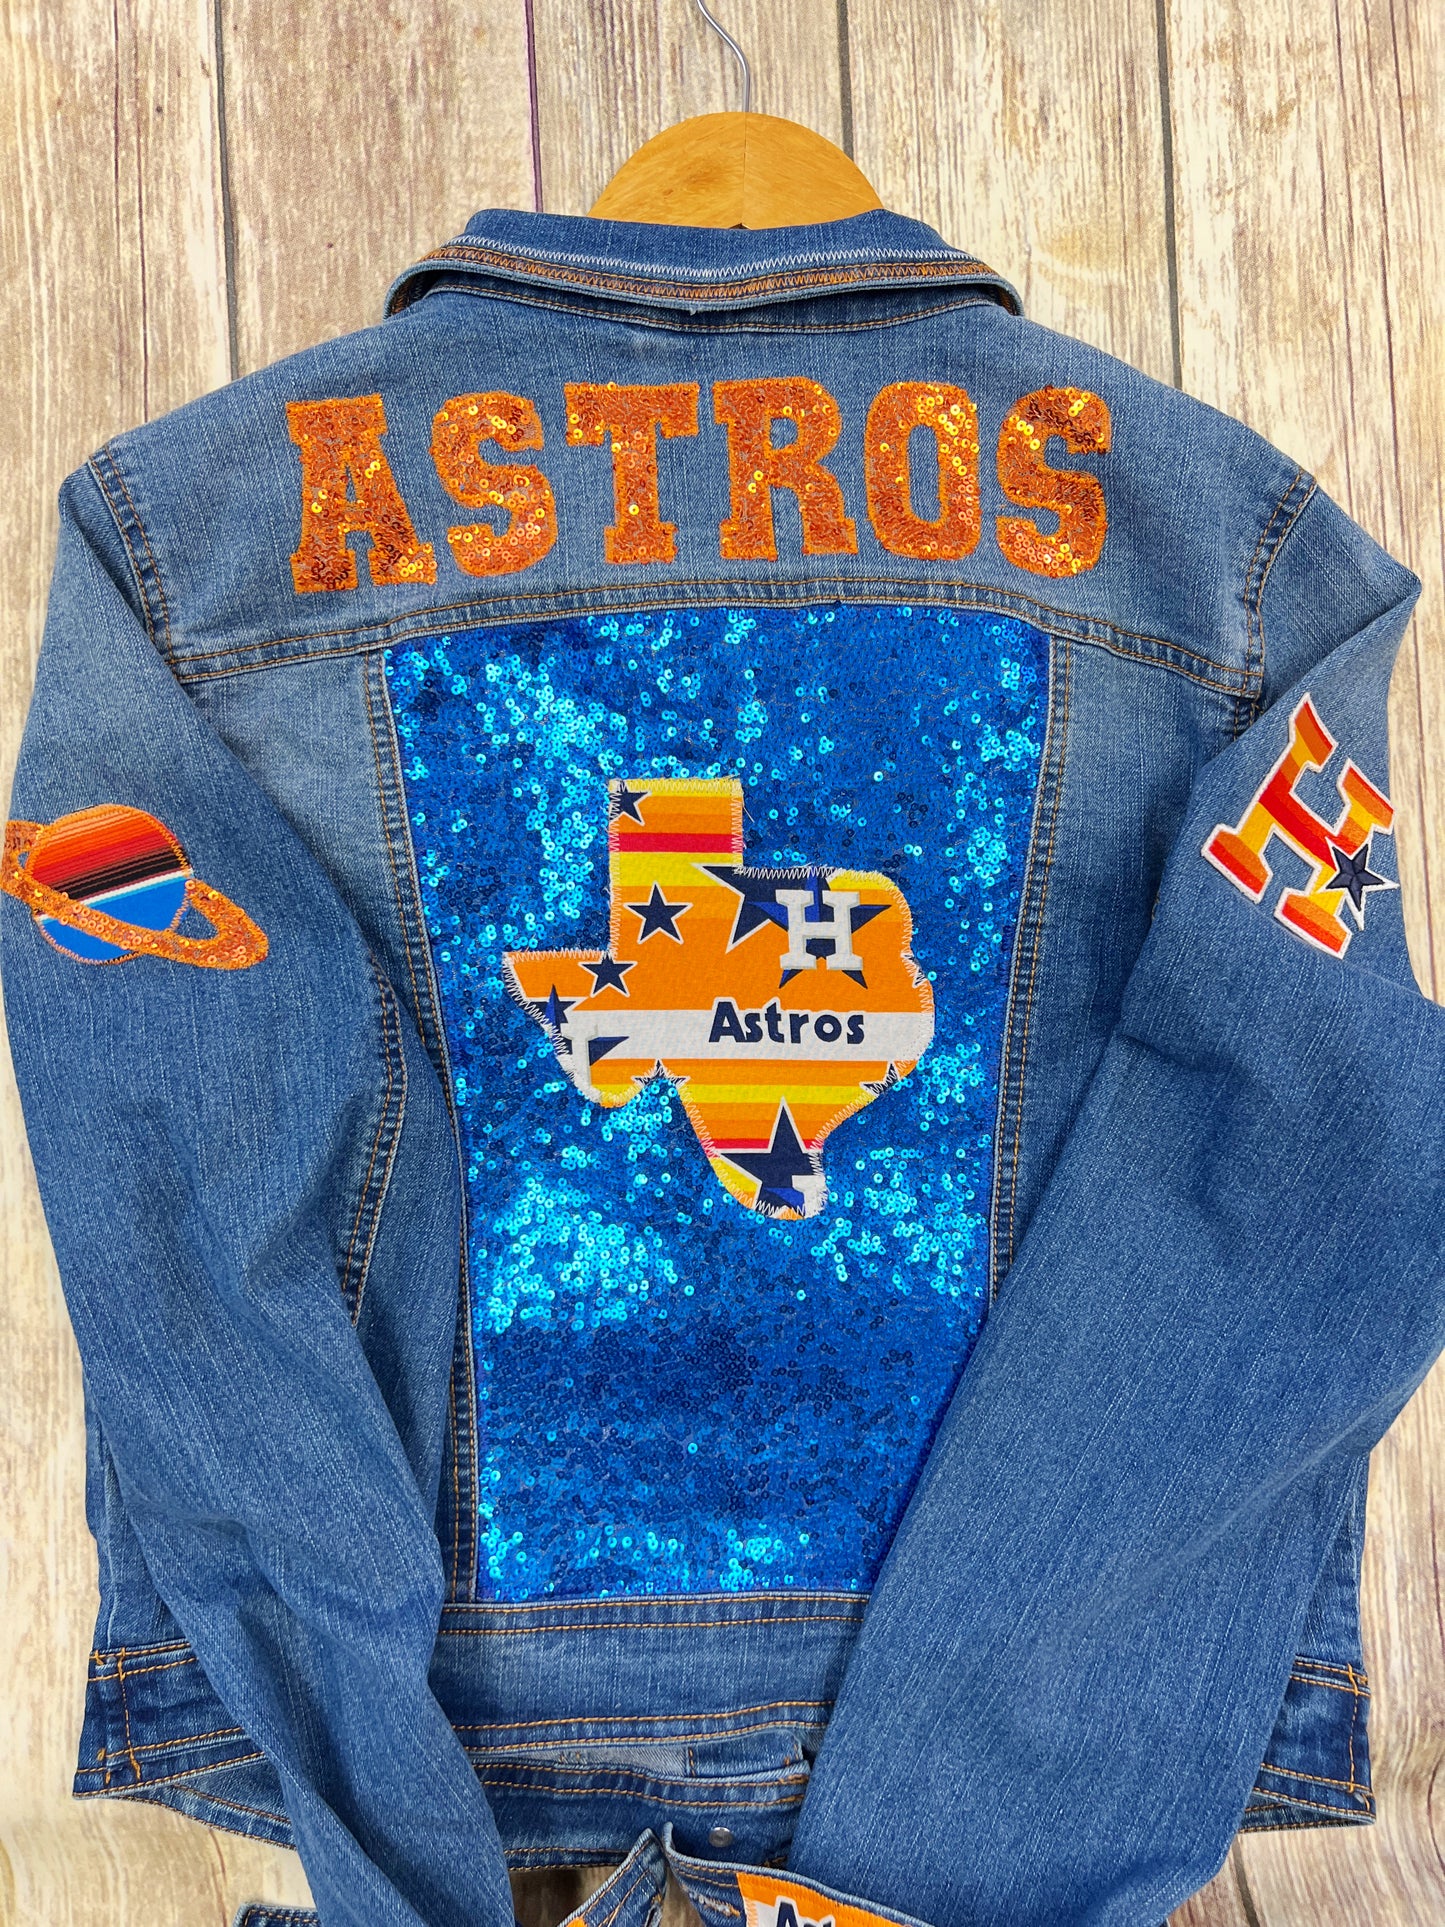 Out of This World Htown Jacket